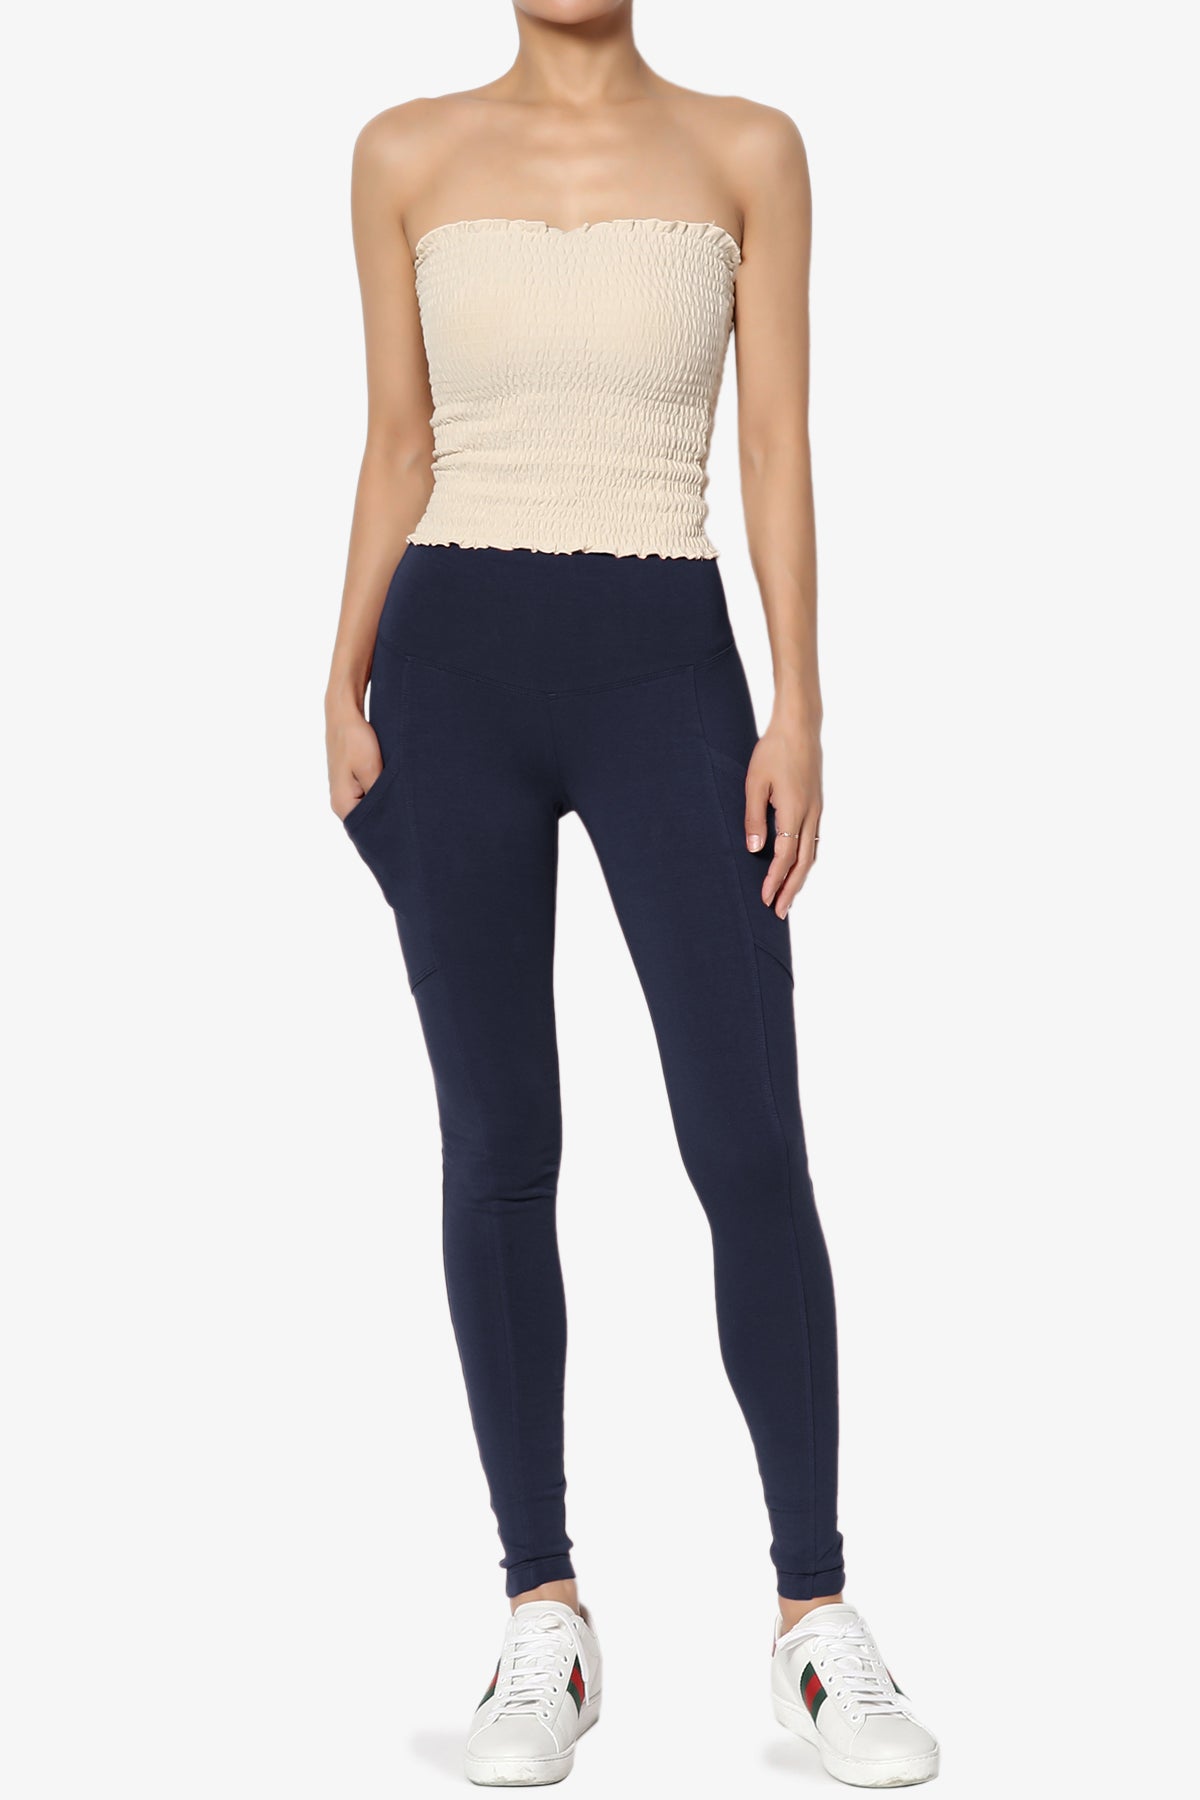 Ansley Luxe Cotton Leggings with Pockets NAVY_6